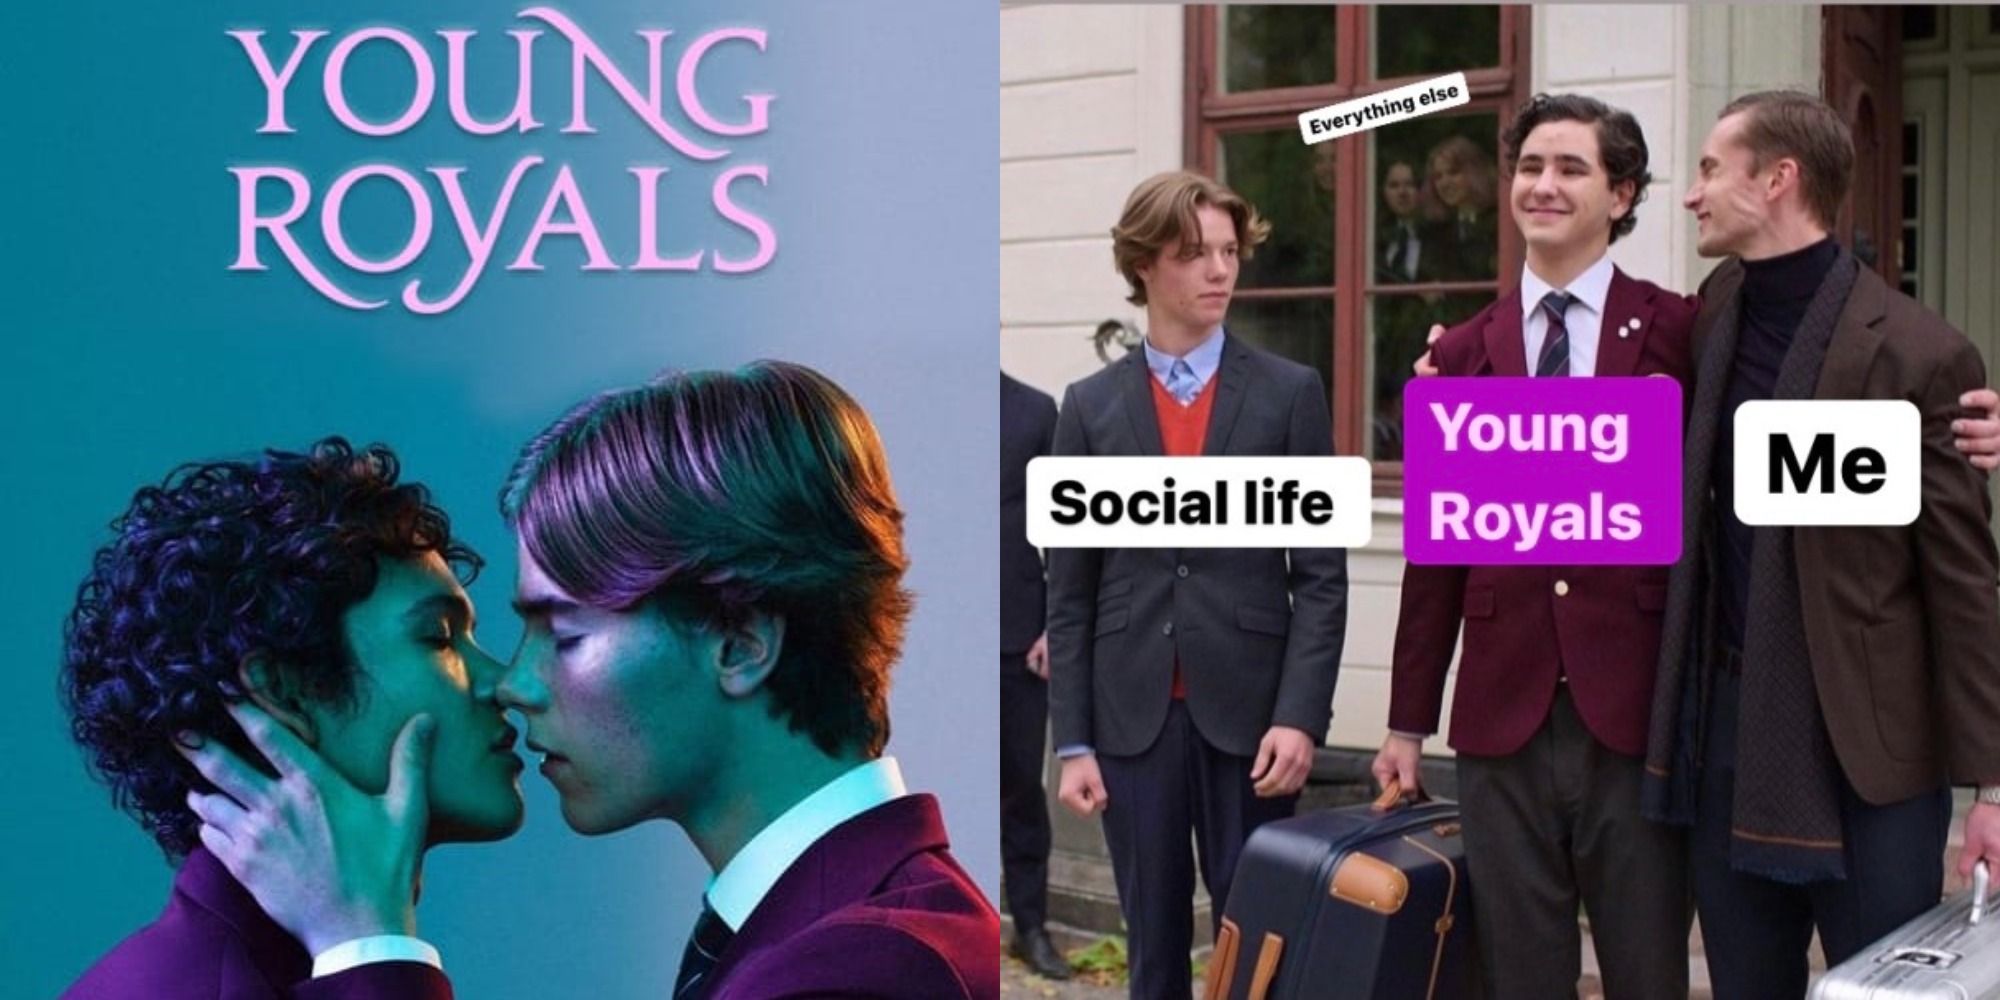 Split image showing a poster for Young Royals and a meme about the show